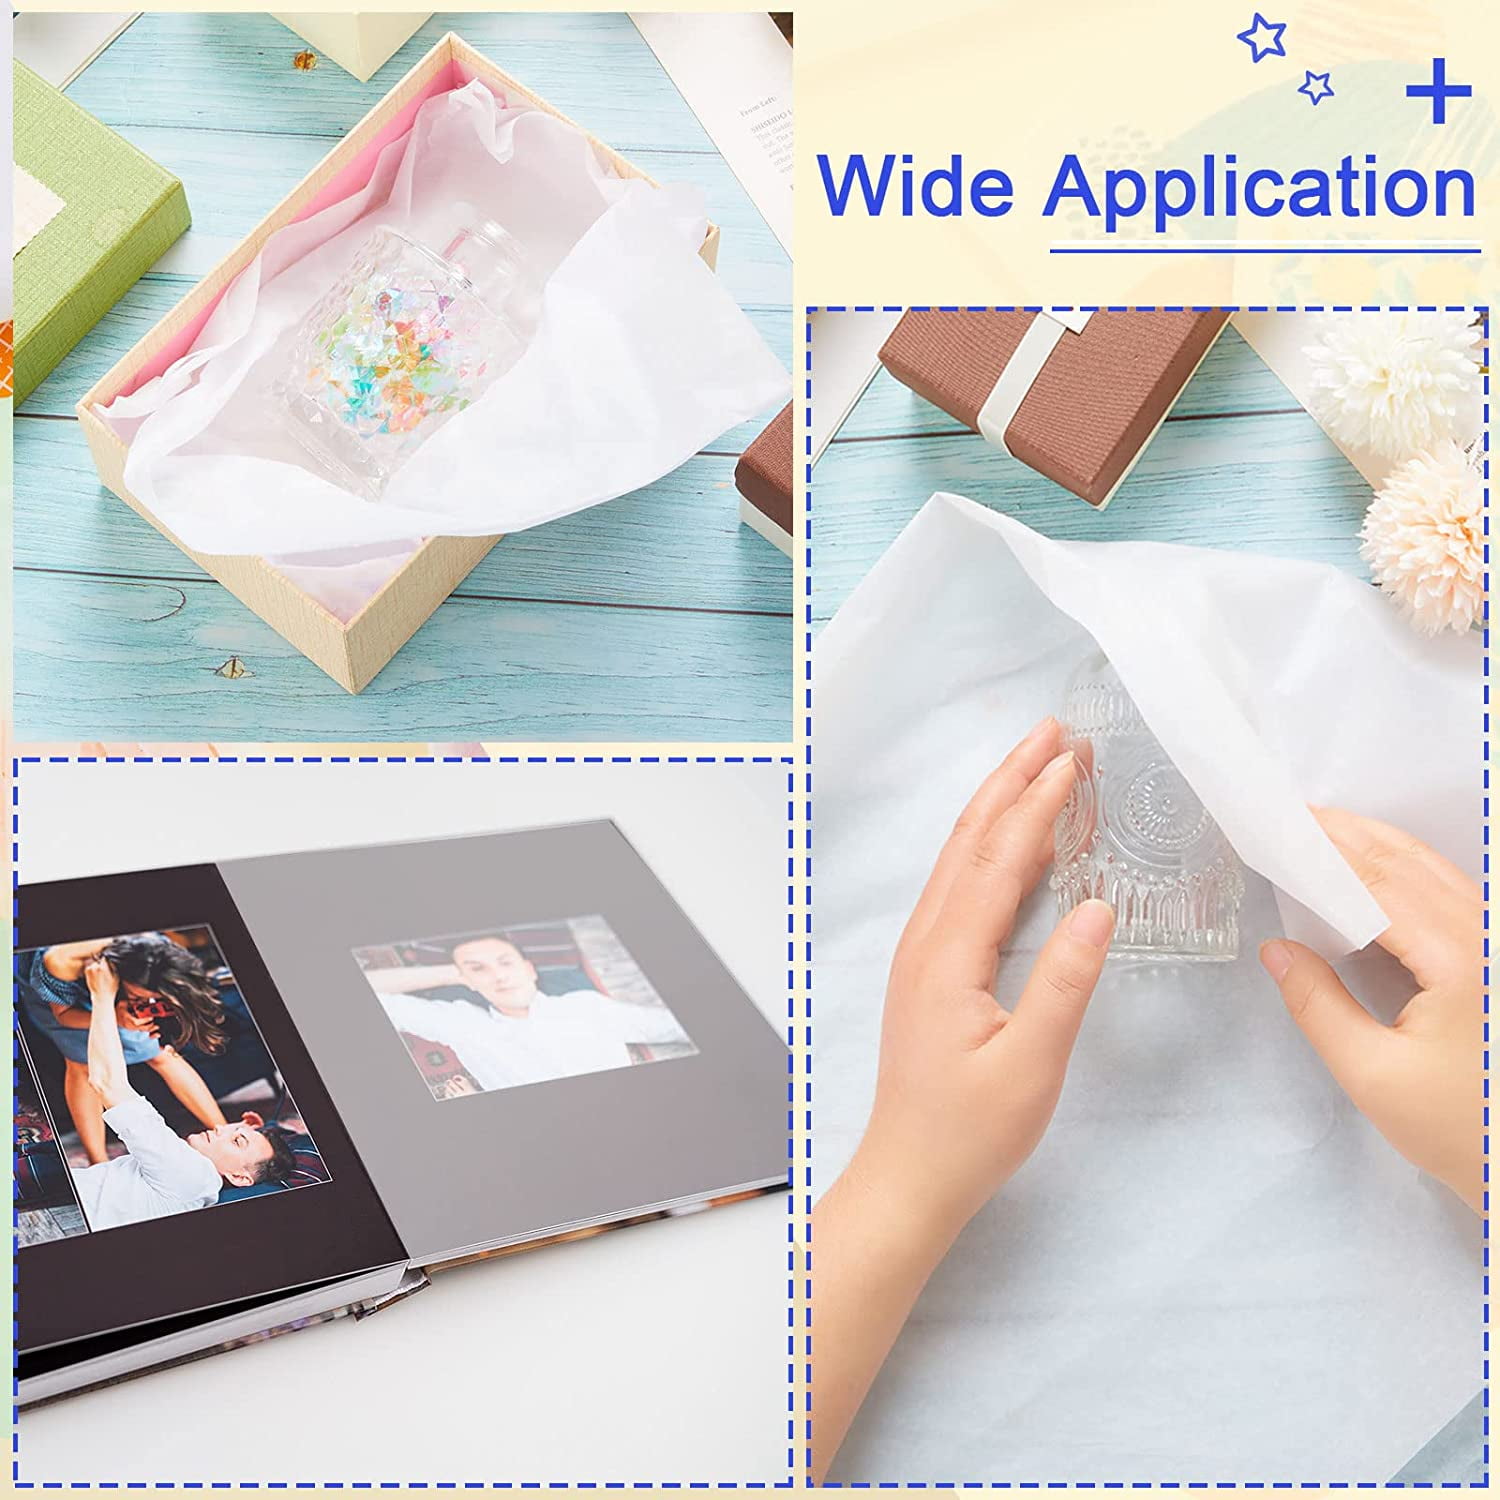 100 Sheets Acid-Free Archival Tissue Paper for Clothing Storage